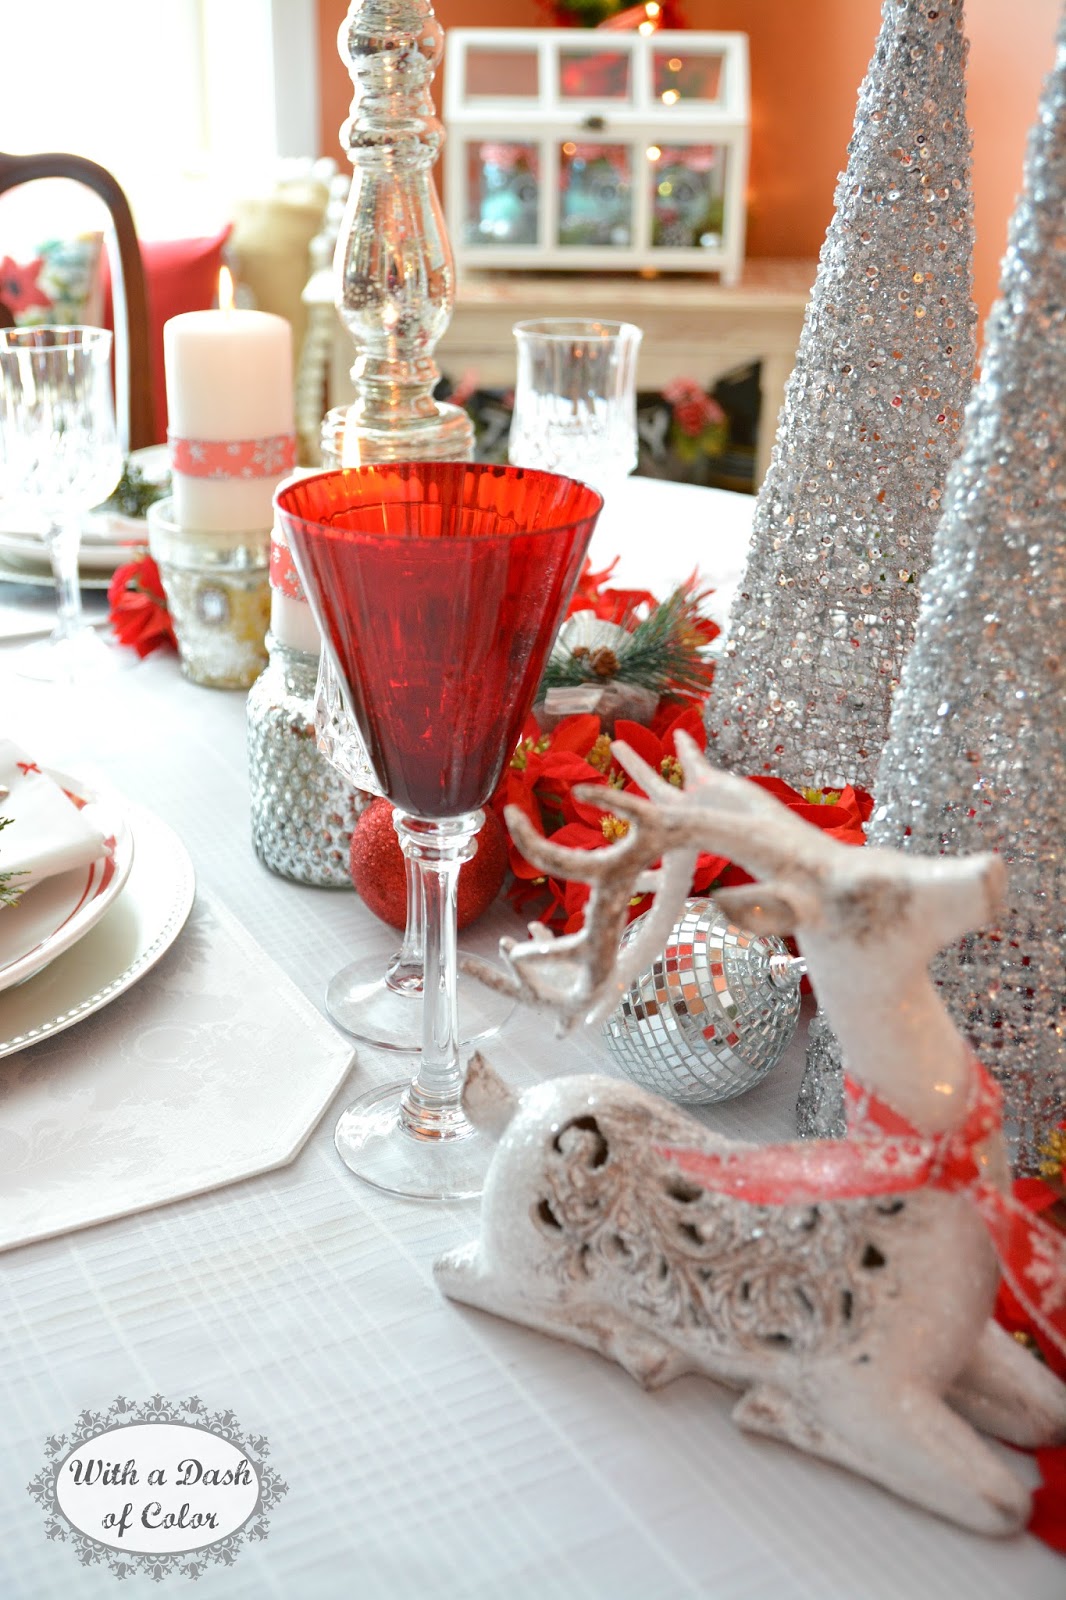 With a Dash of Color: 2014 Holiday Tablescape in Scandinavian Colors!